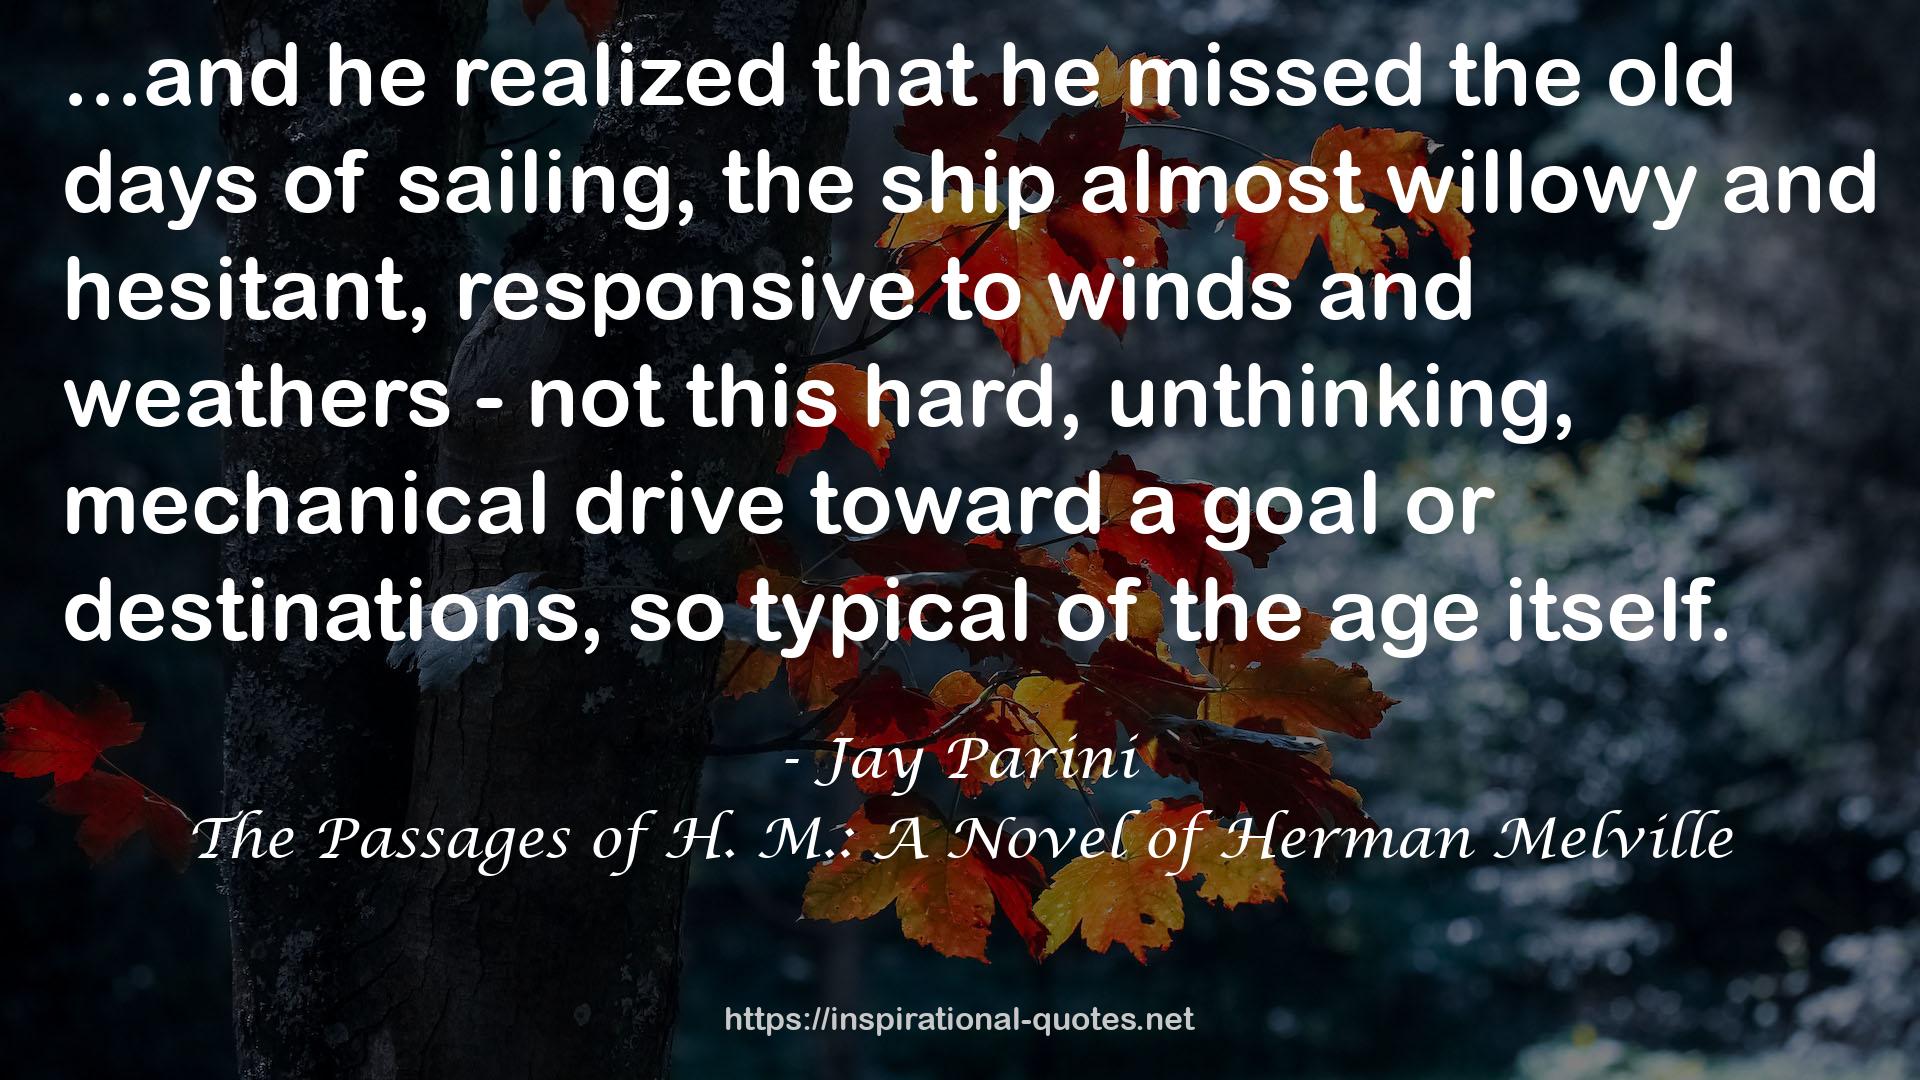 The Passages of H. M.: A Novel of Herman Melville QUOTES